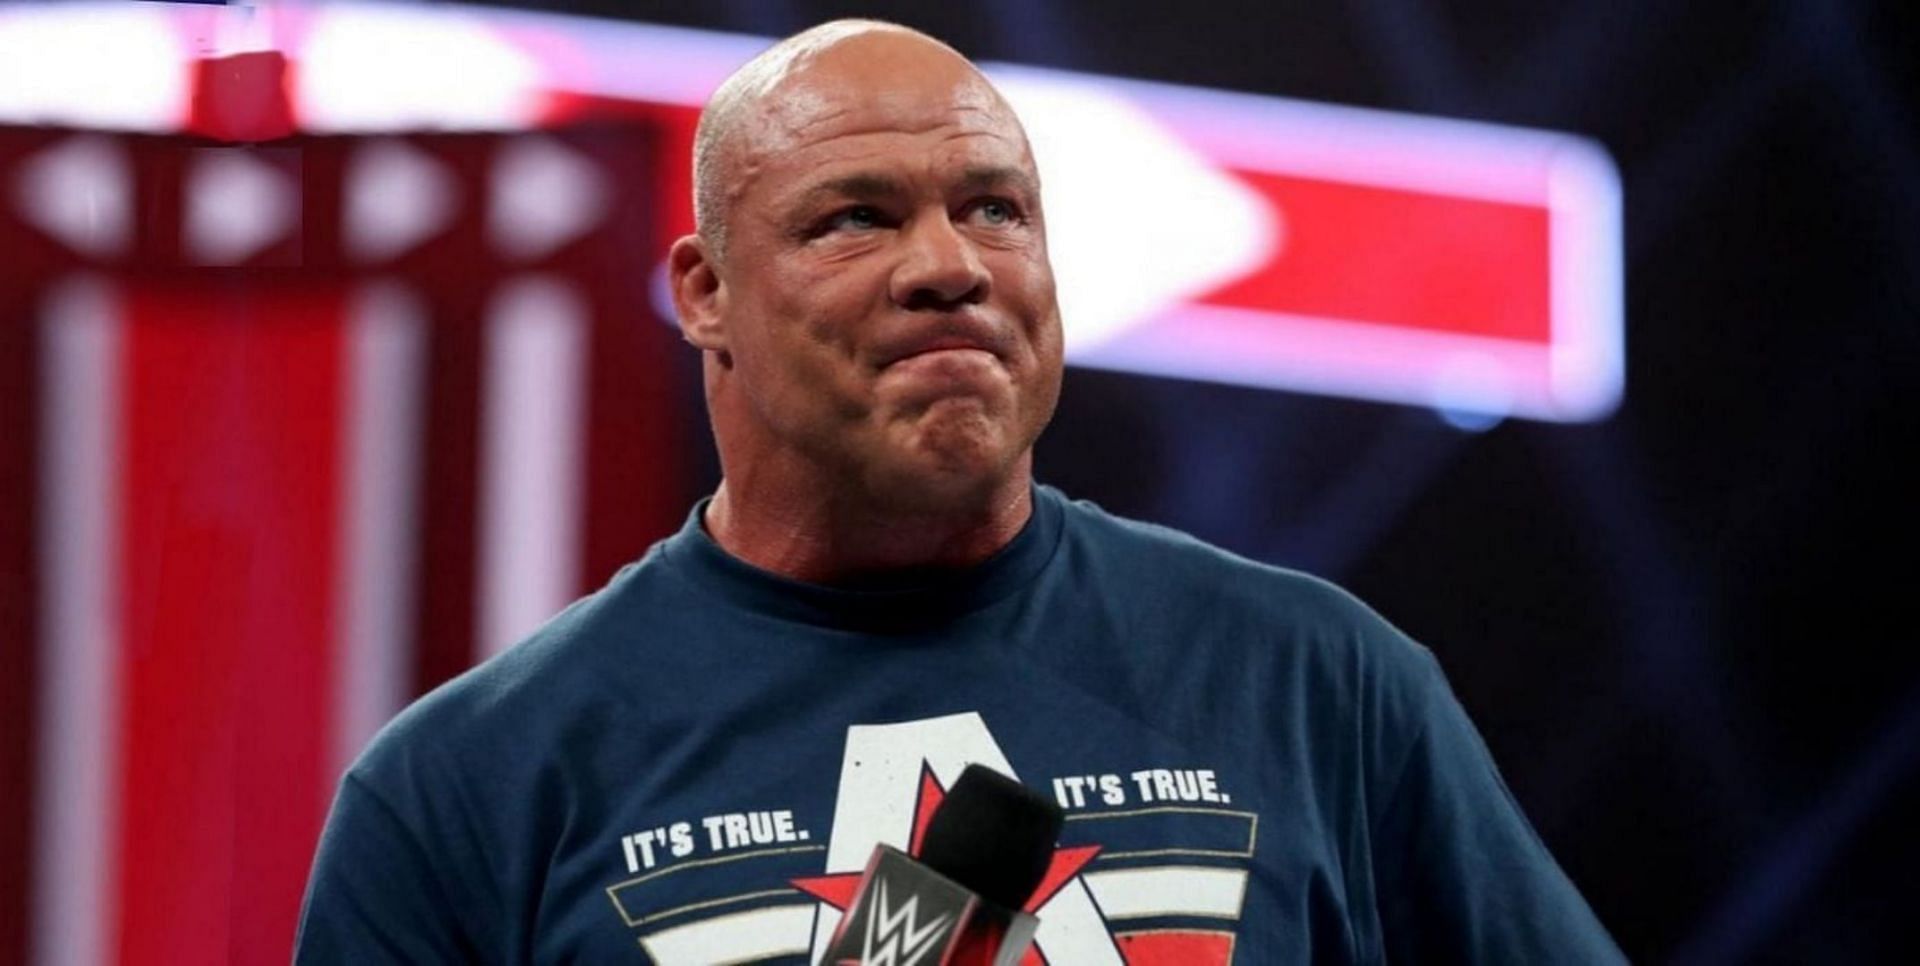 Kurt Angle worked with Riddle in 2020